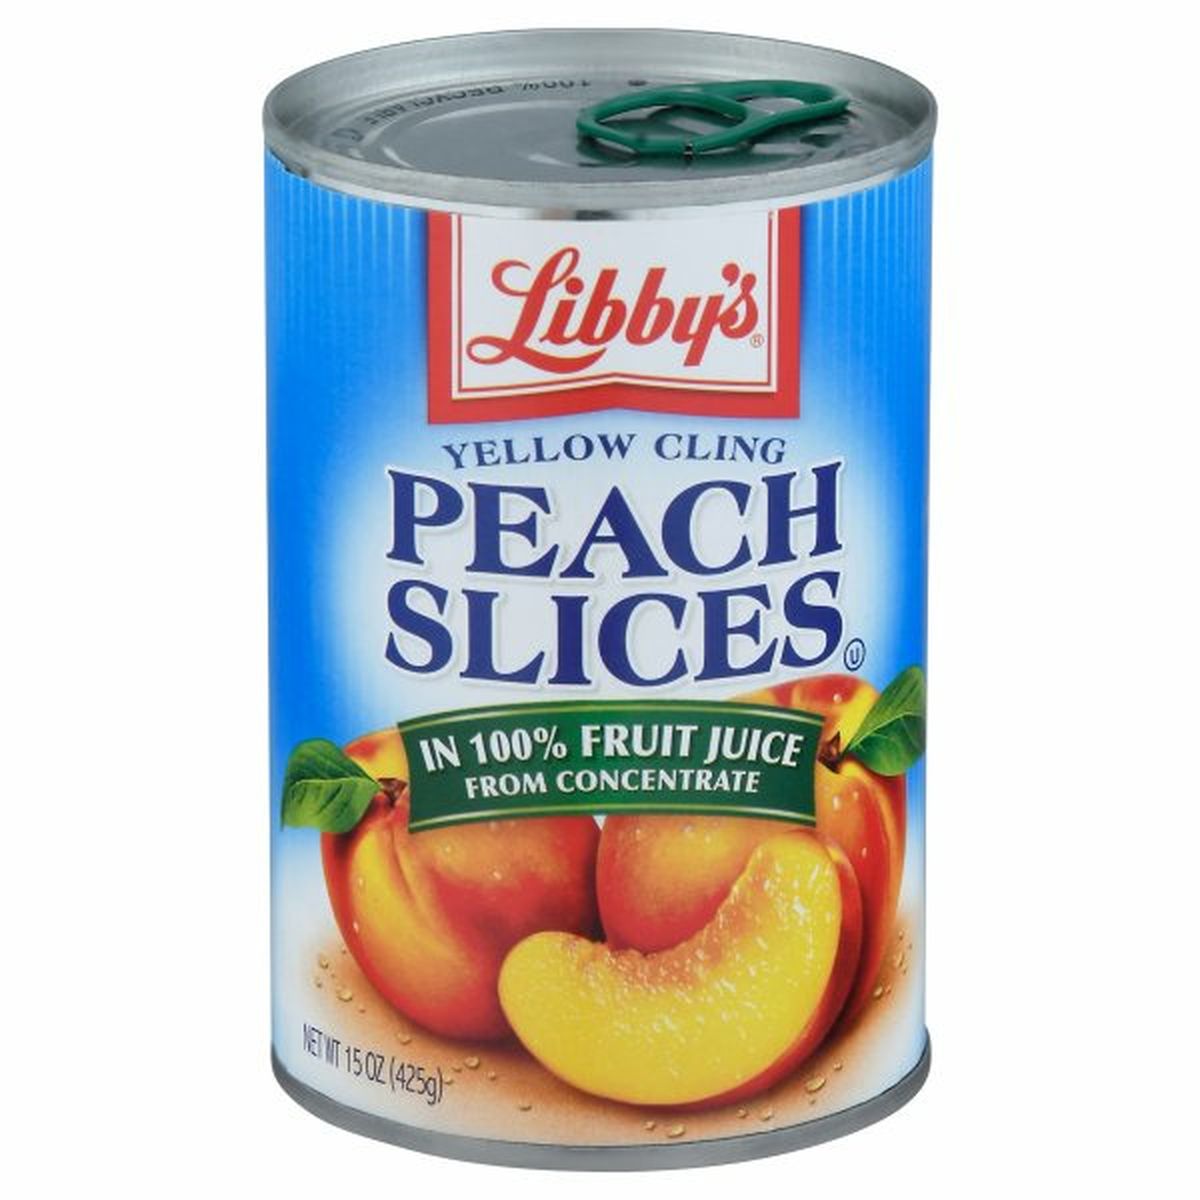 Calories in Libby's Peach Slices, Yellow Cling